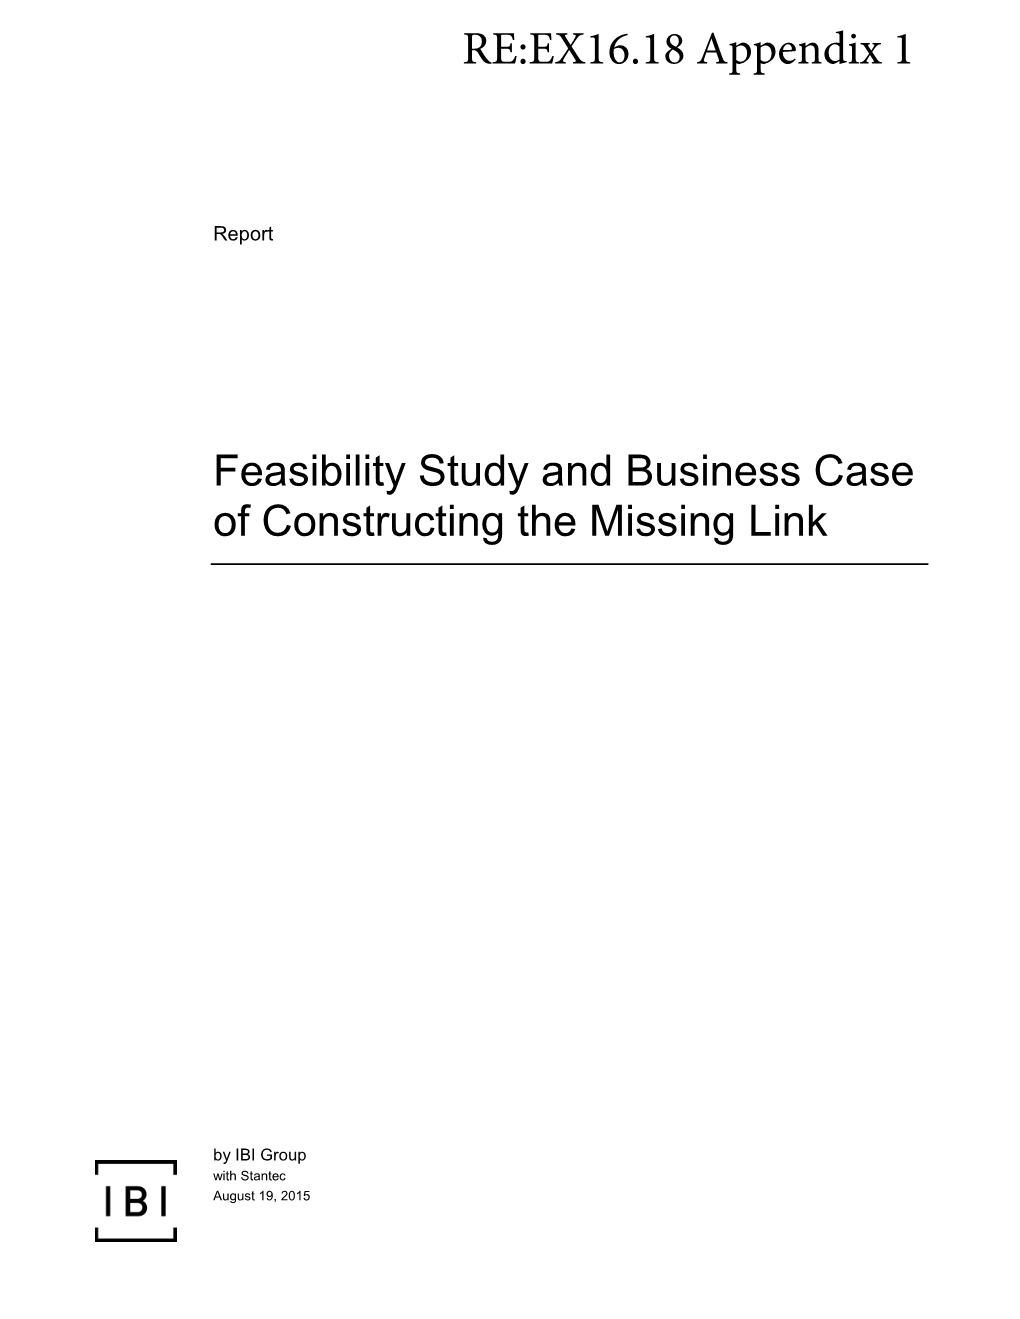 Feasibility Study and Business Case of Construction The